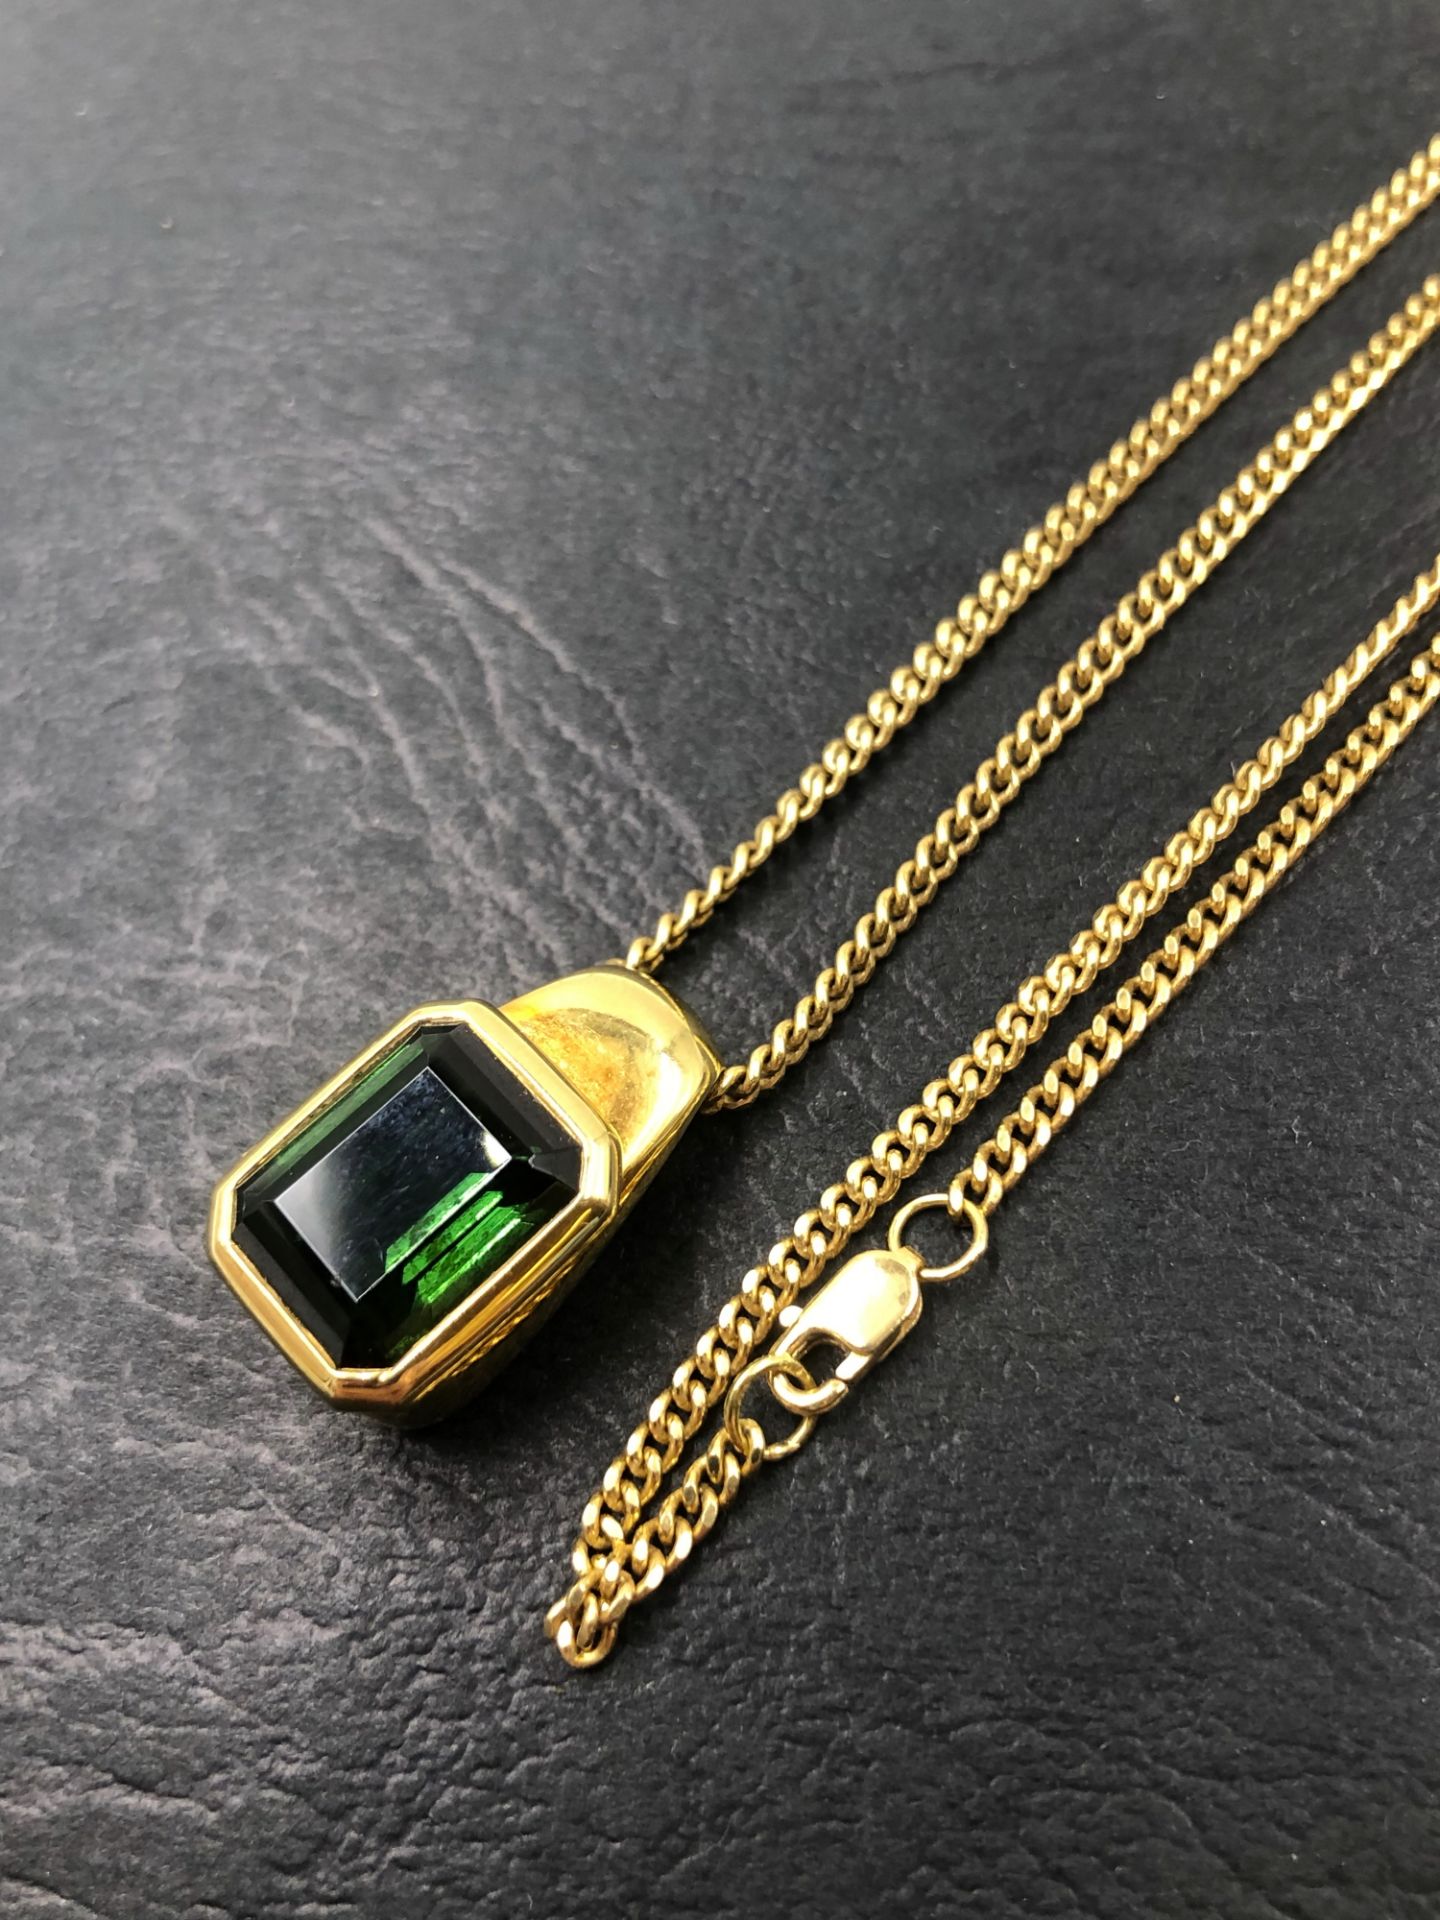 H.STERN. A GREEN TOURMALINE PENDANT, WITH SIGNATURE STAMP FOR H.STERN, ADDITIONAL 750 MARK, ASSESS - Bild 4 aus 5